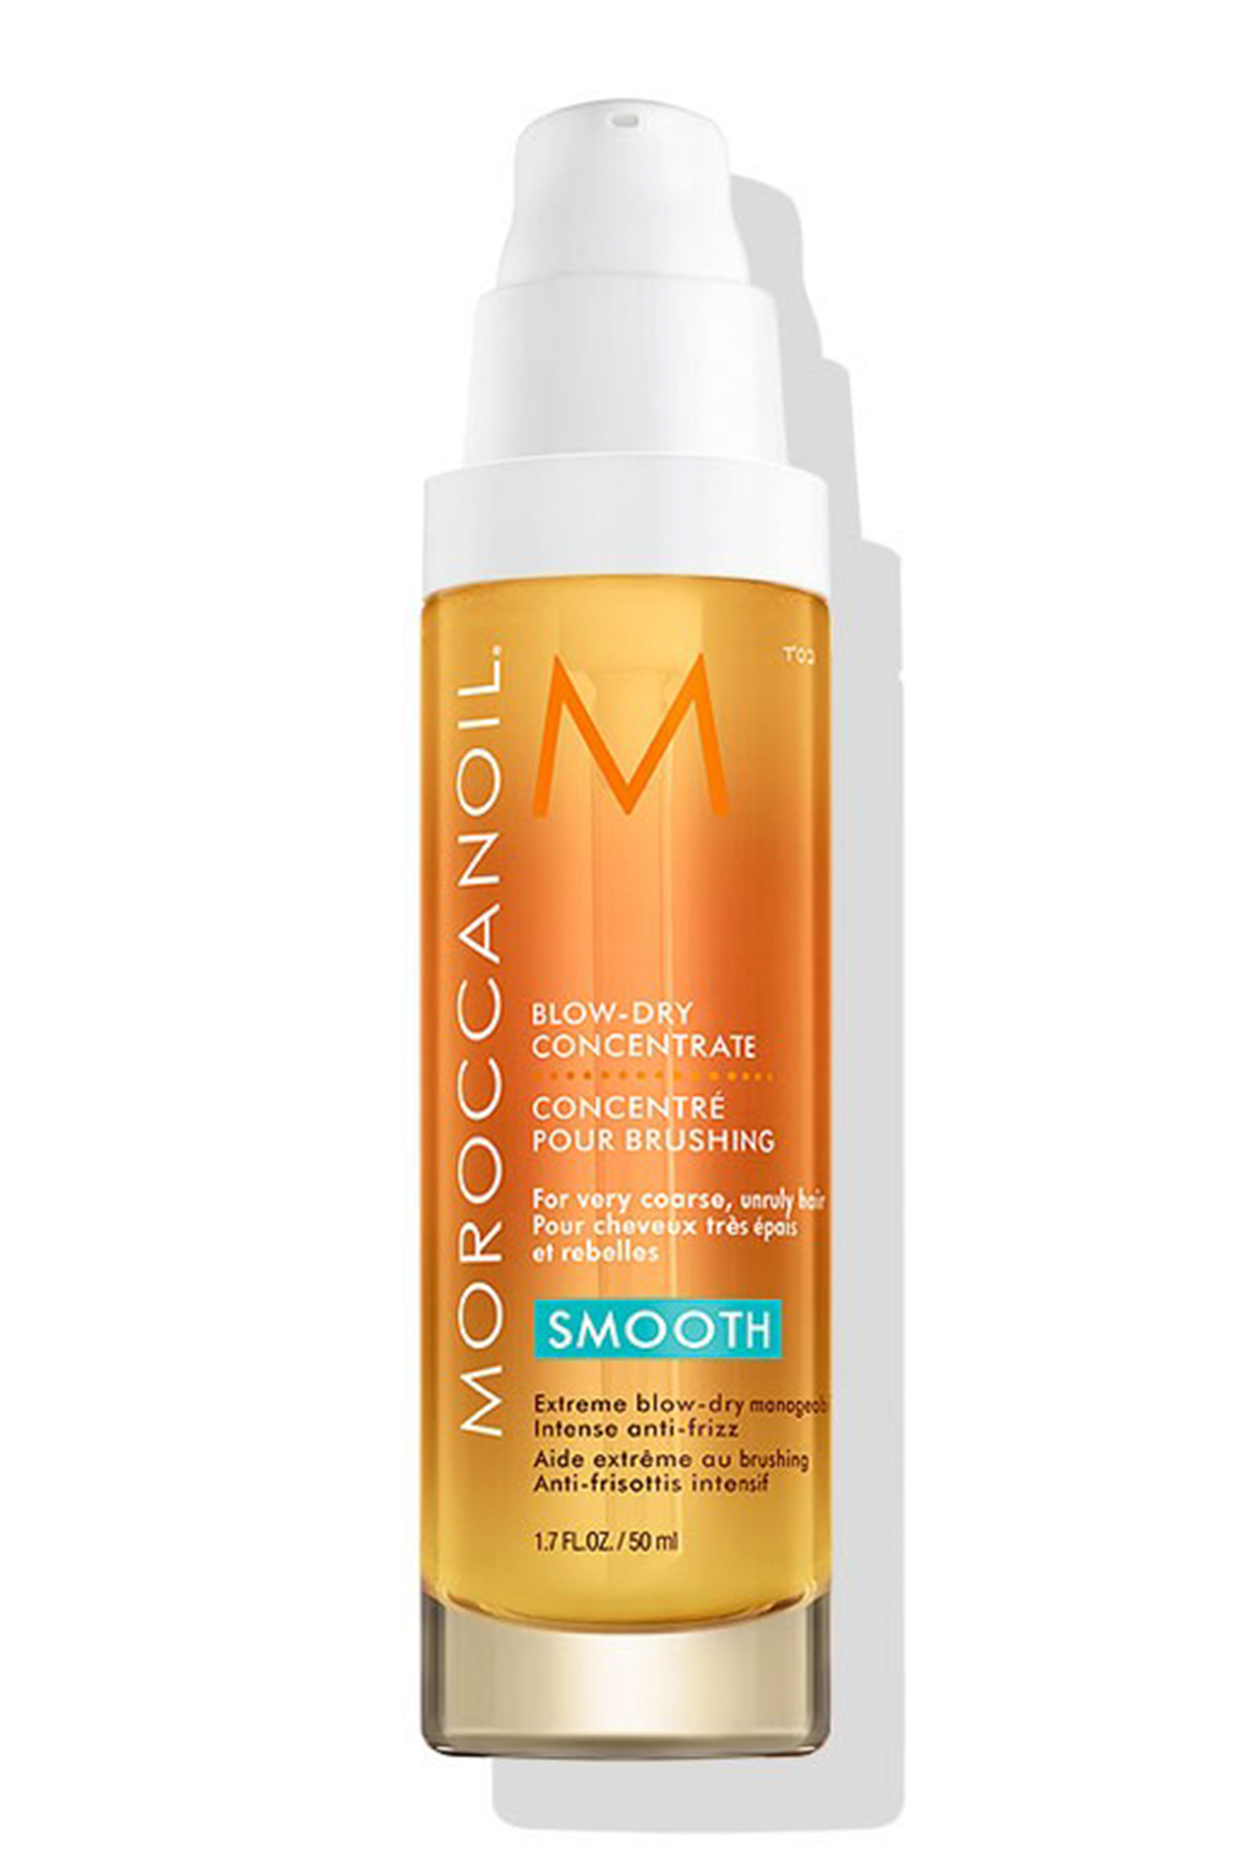 Moroccanoil Blow-Dry Concentrate